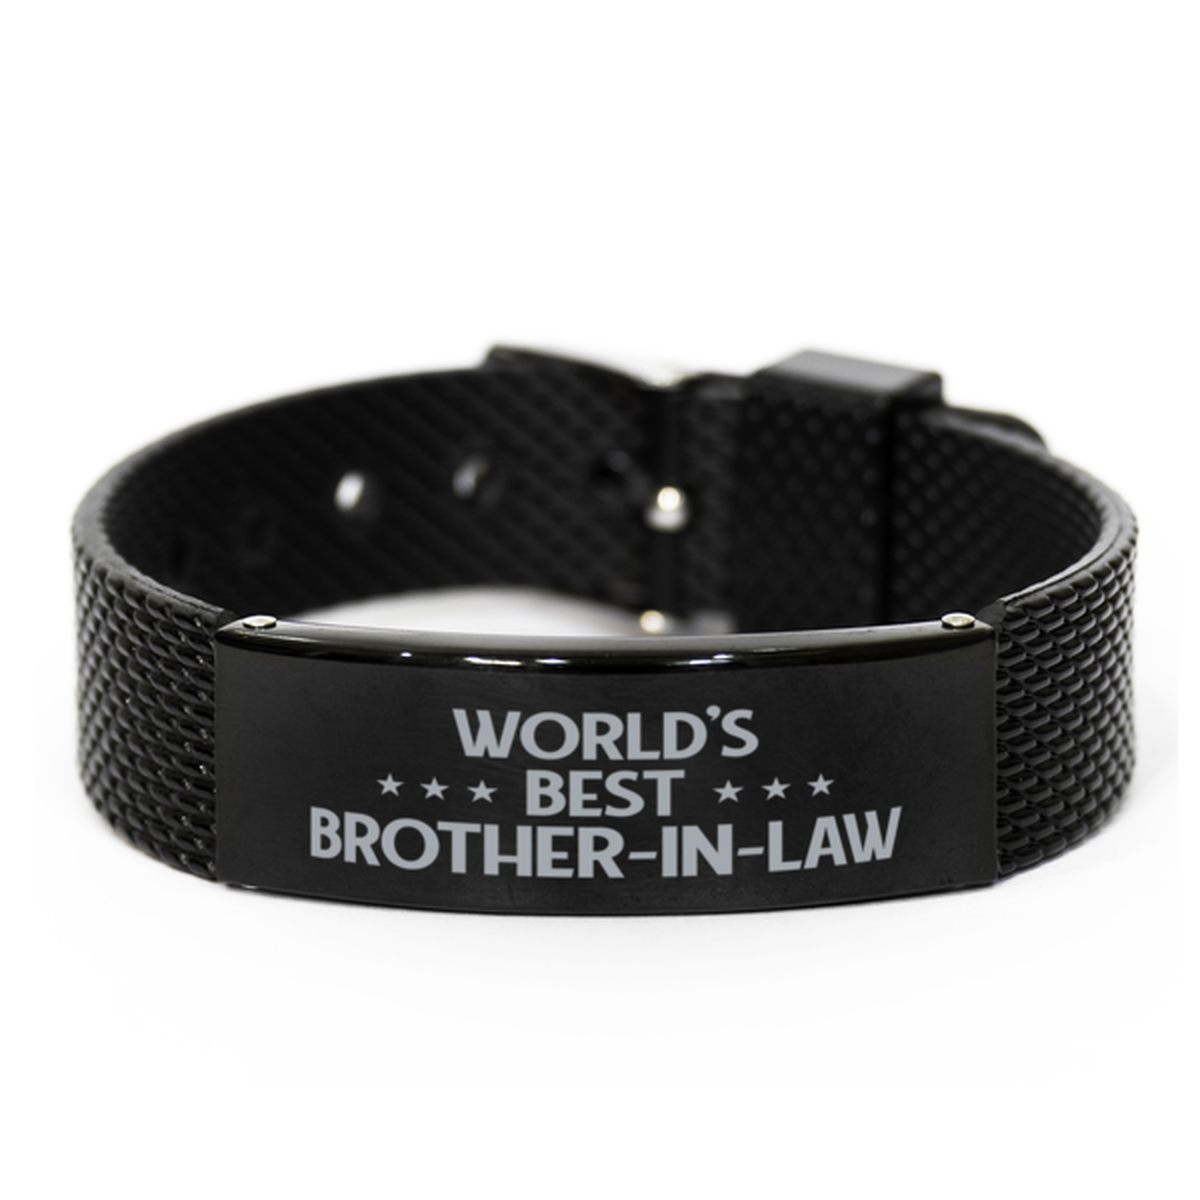 World's Best Brother-in-law Gifts, Gag Engraved Bracelet For Brother-in-law, Best Family Gifts For Men